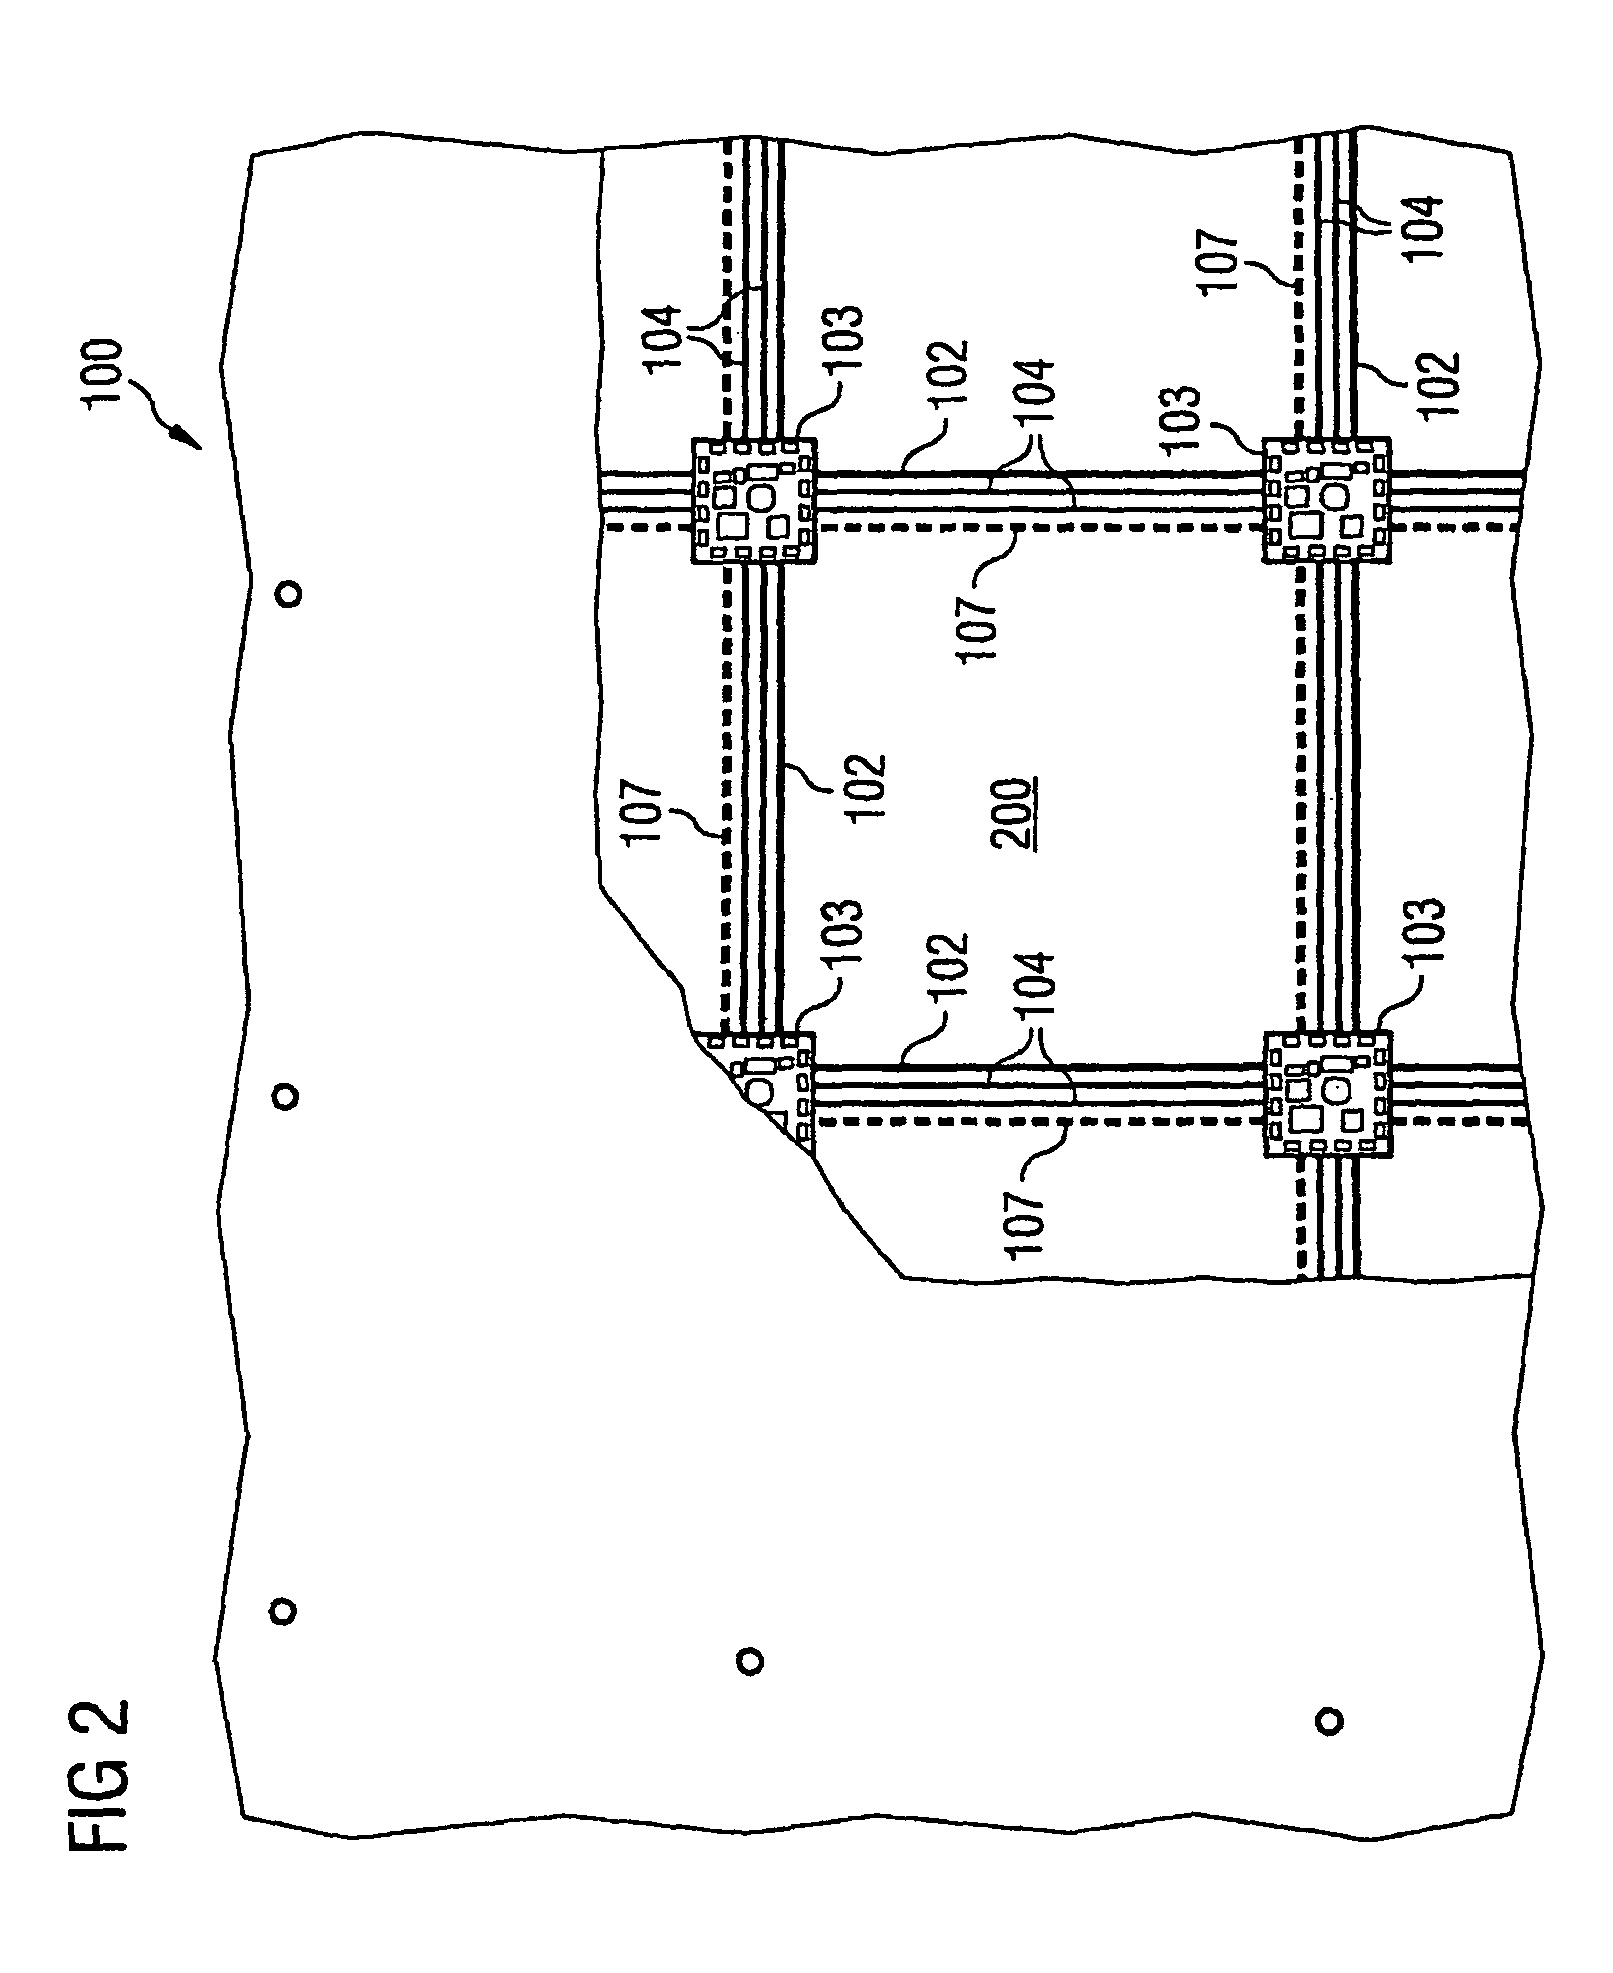 Processor array having a multiplicity of processor elements and method of transmitting electricity between processor elements